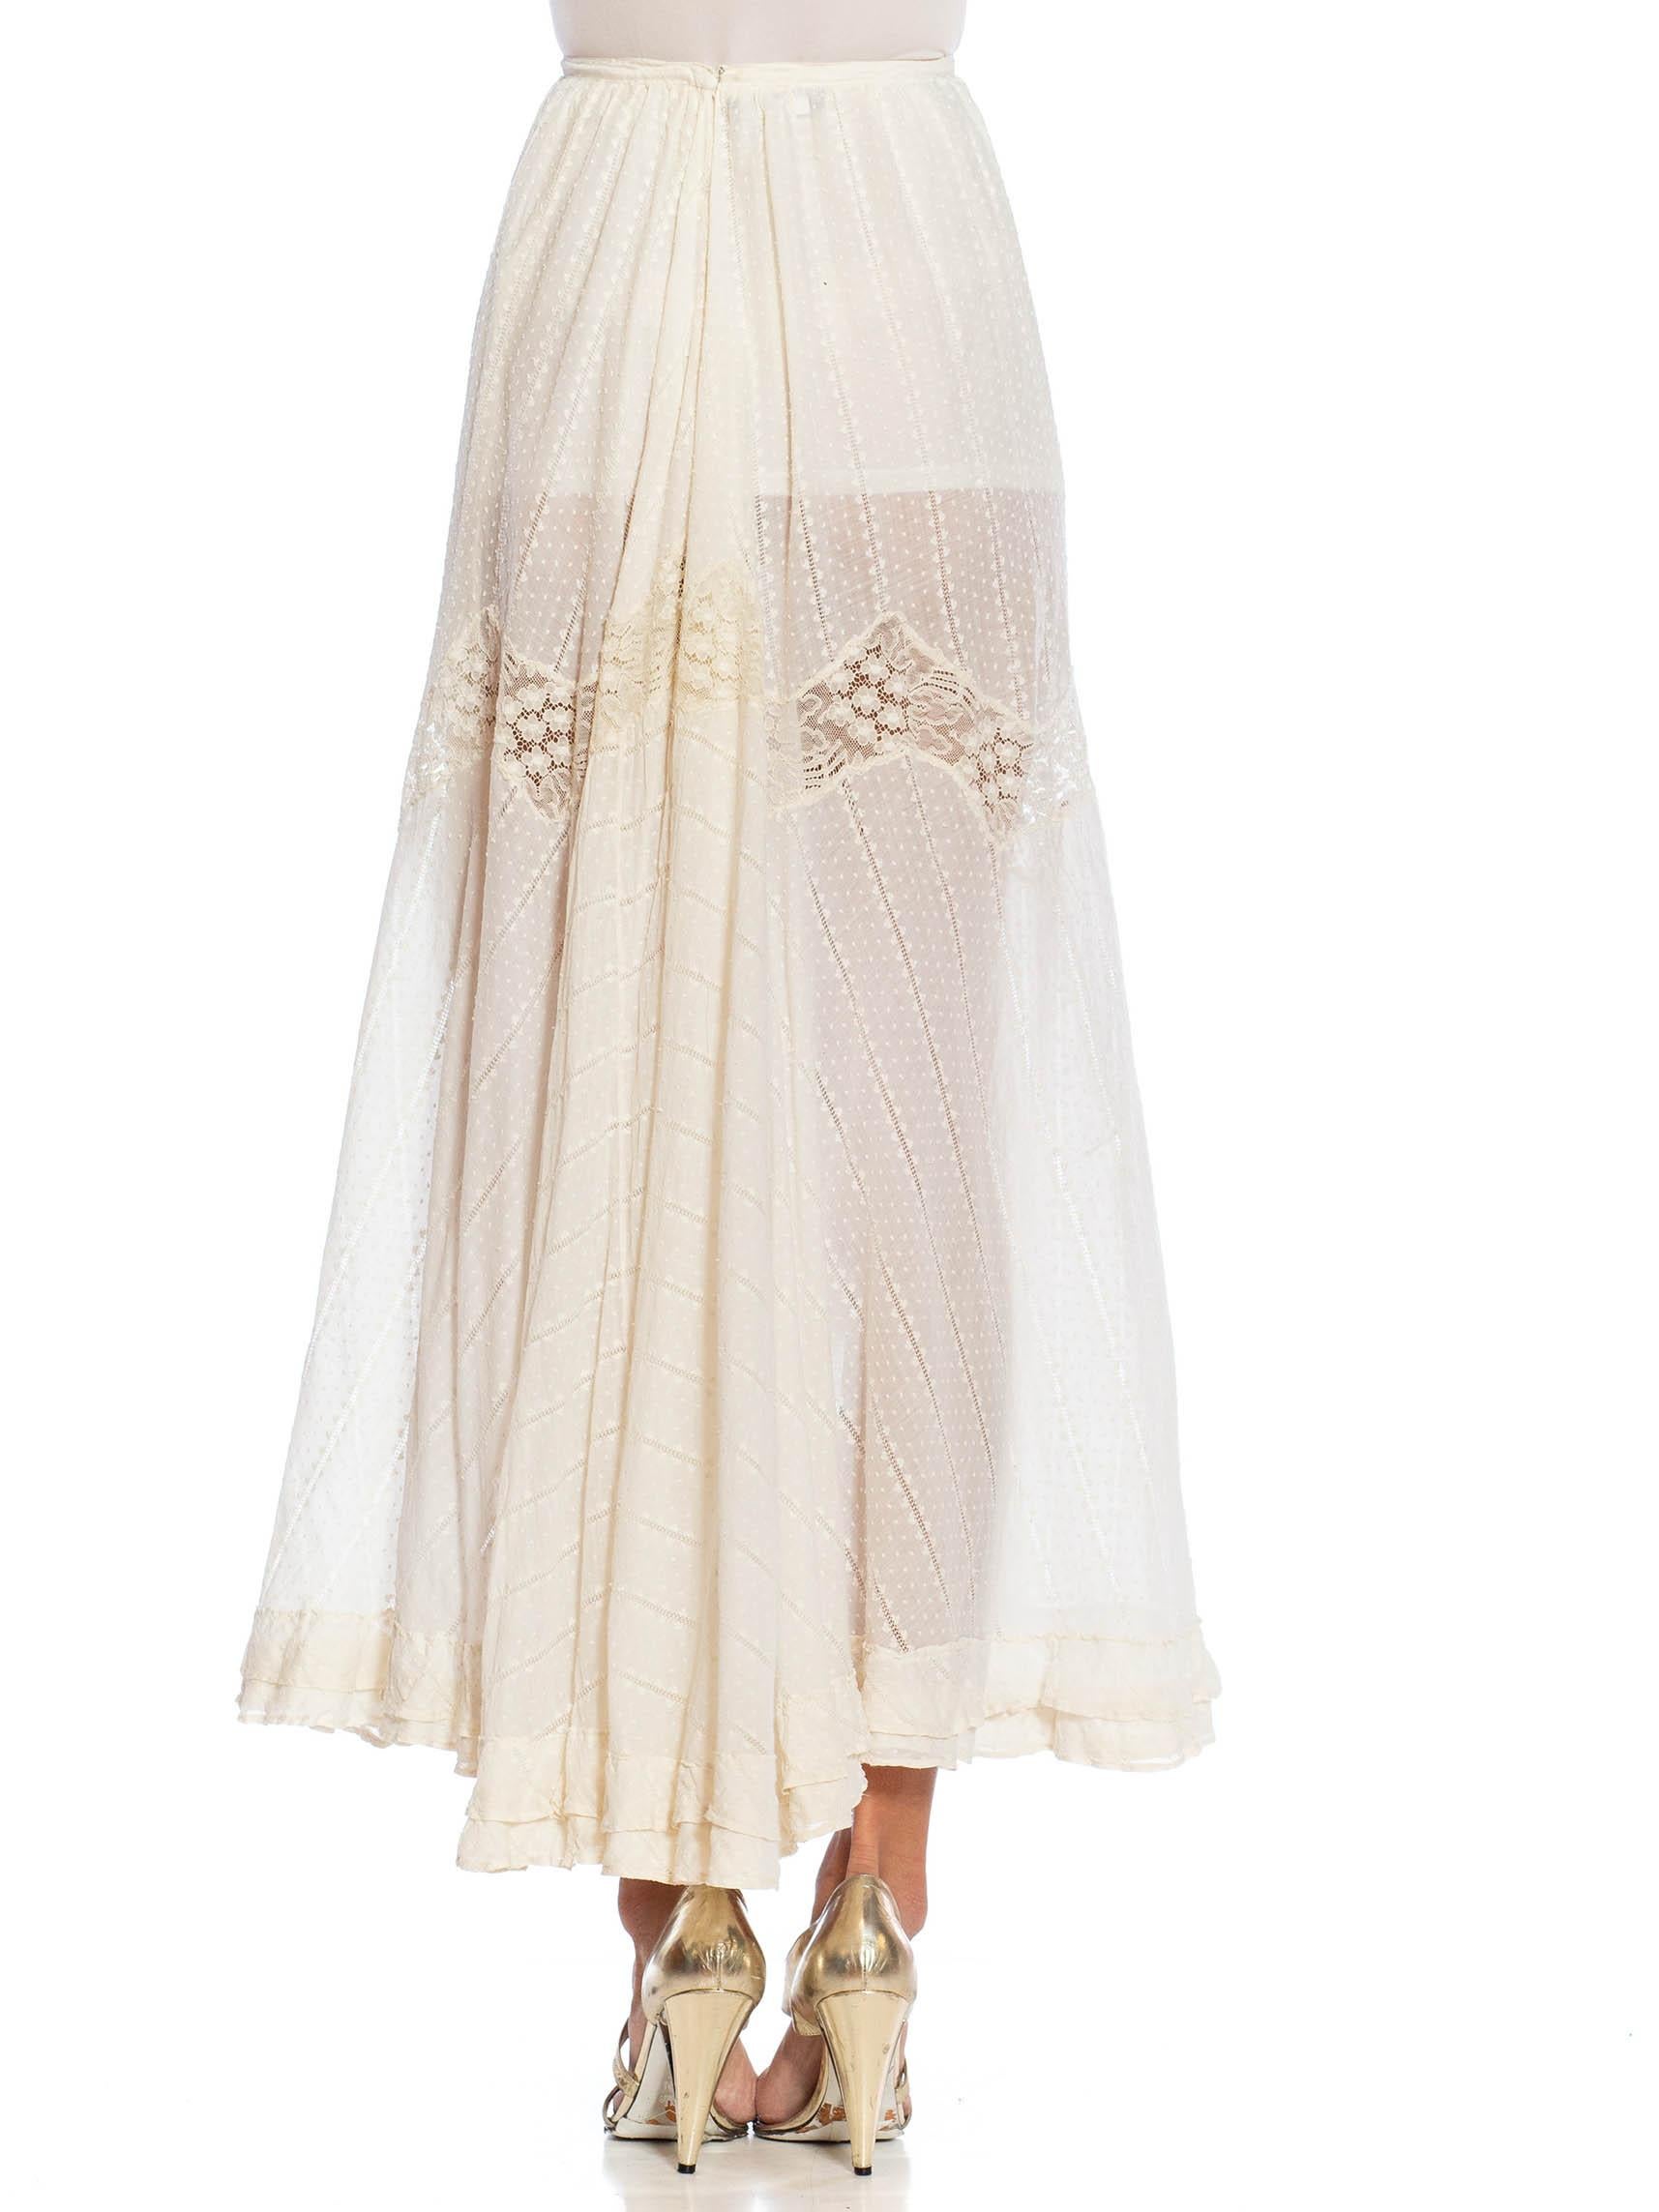 Victorian Ivory Organic Cotton & Lace Trimmed Skirt For Sale 3